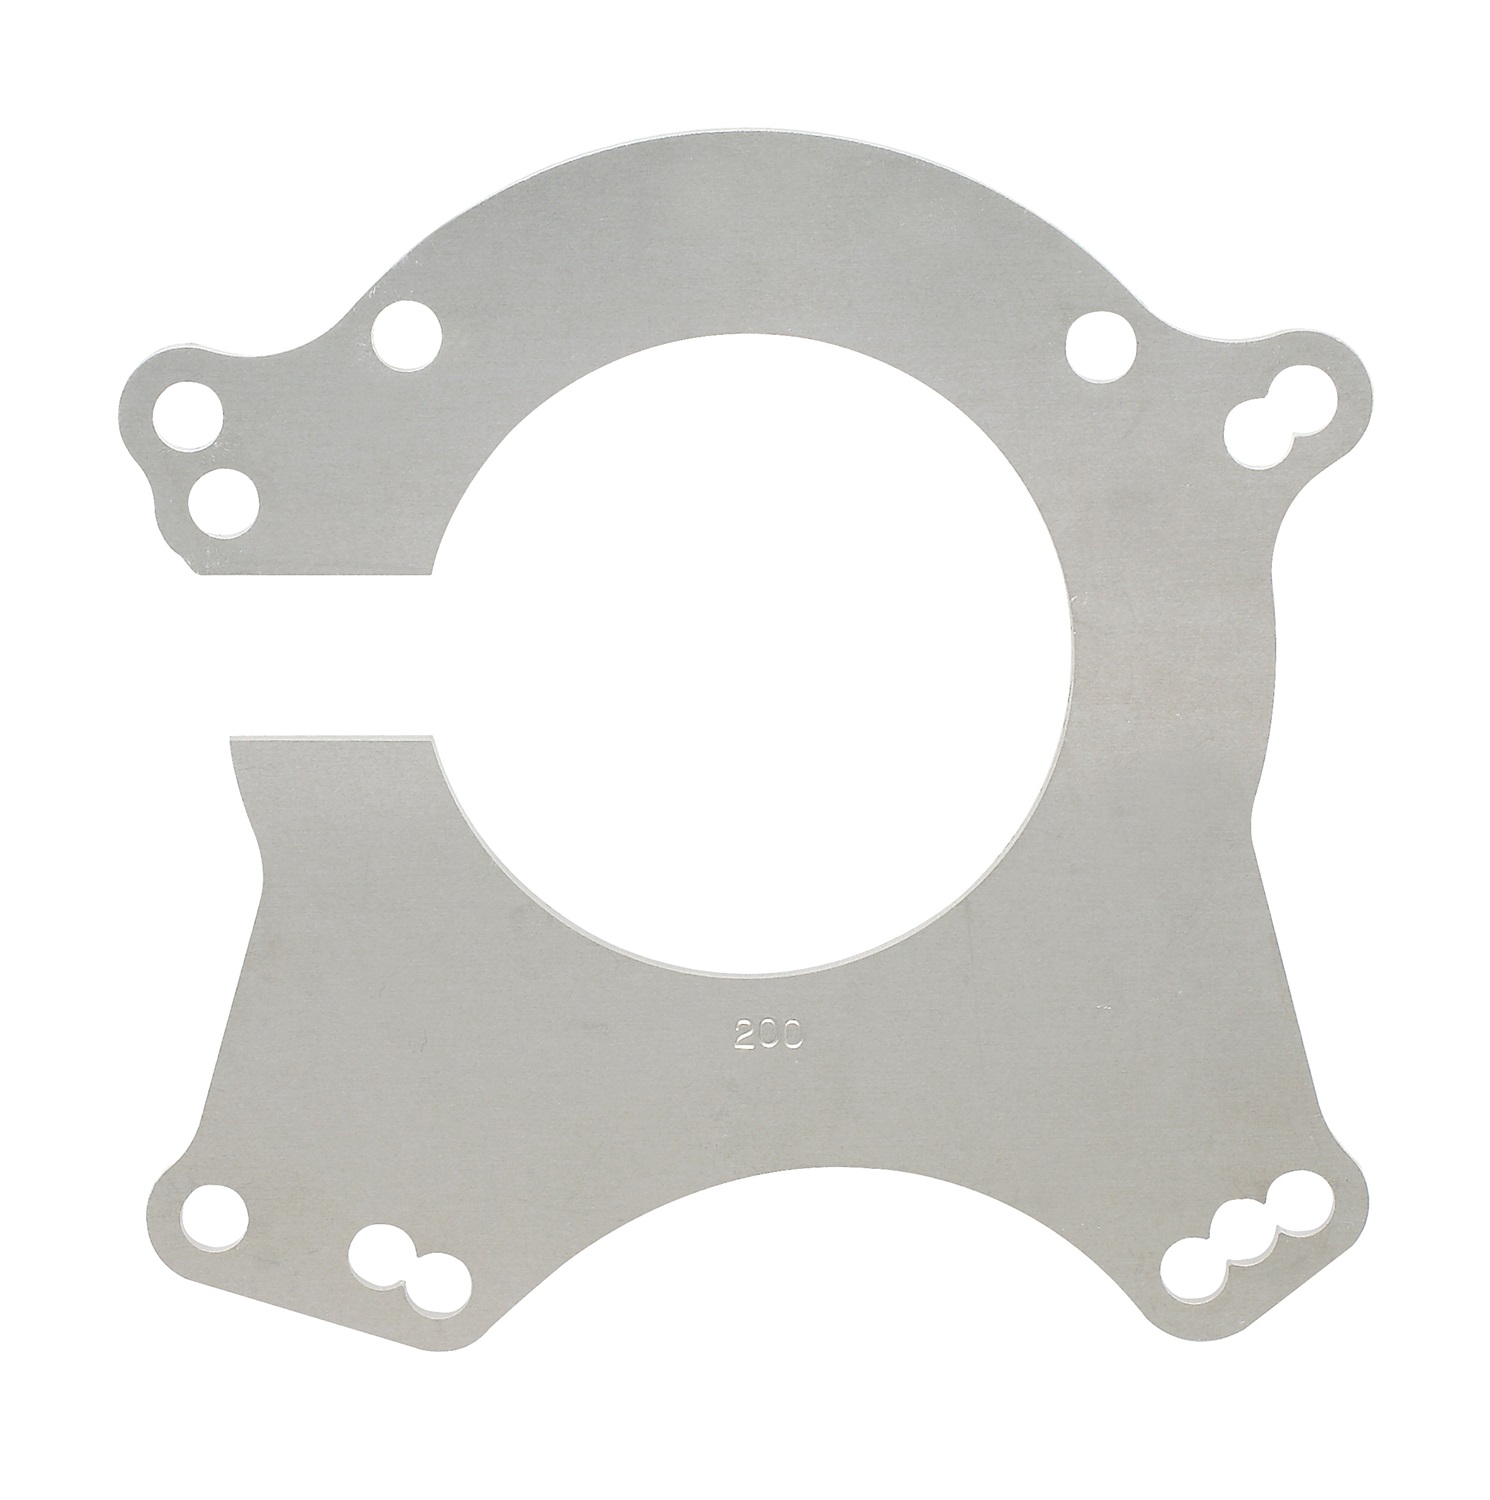 Lakewood Lakewood RM-200 Ford Spacer Plate